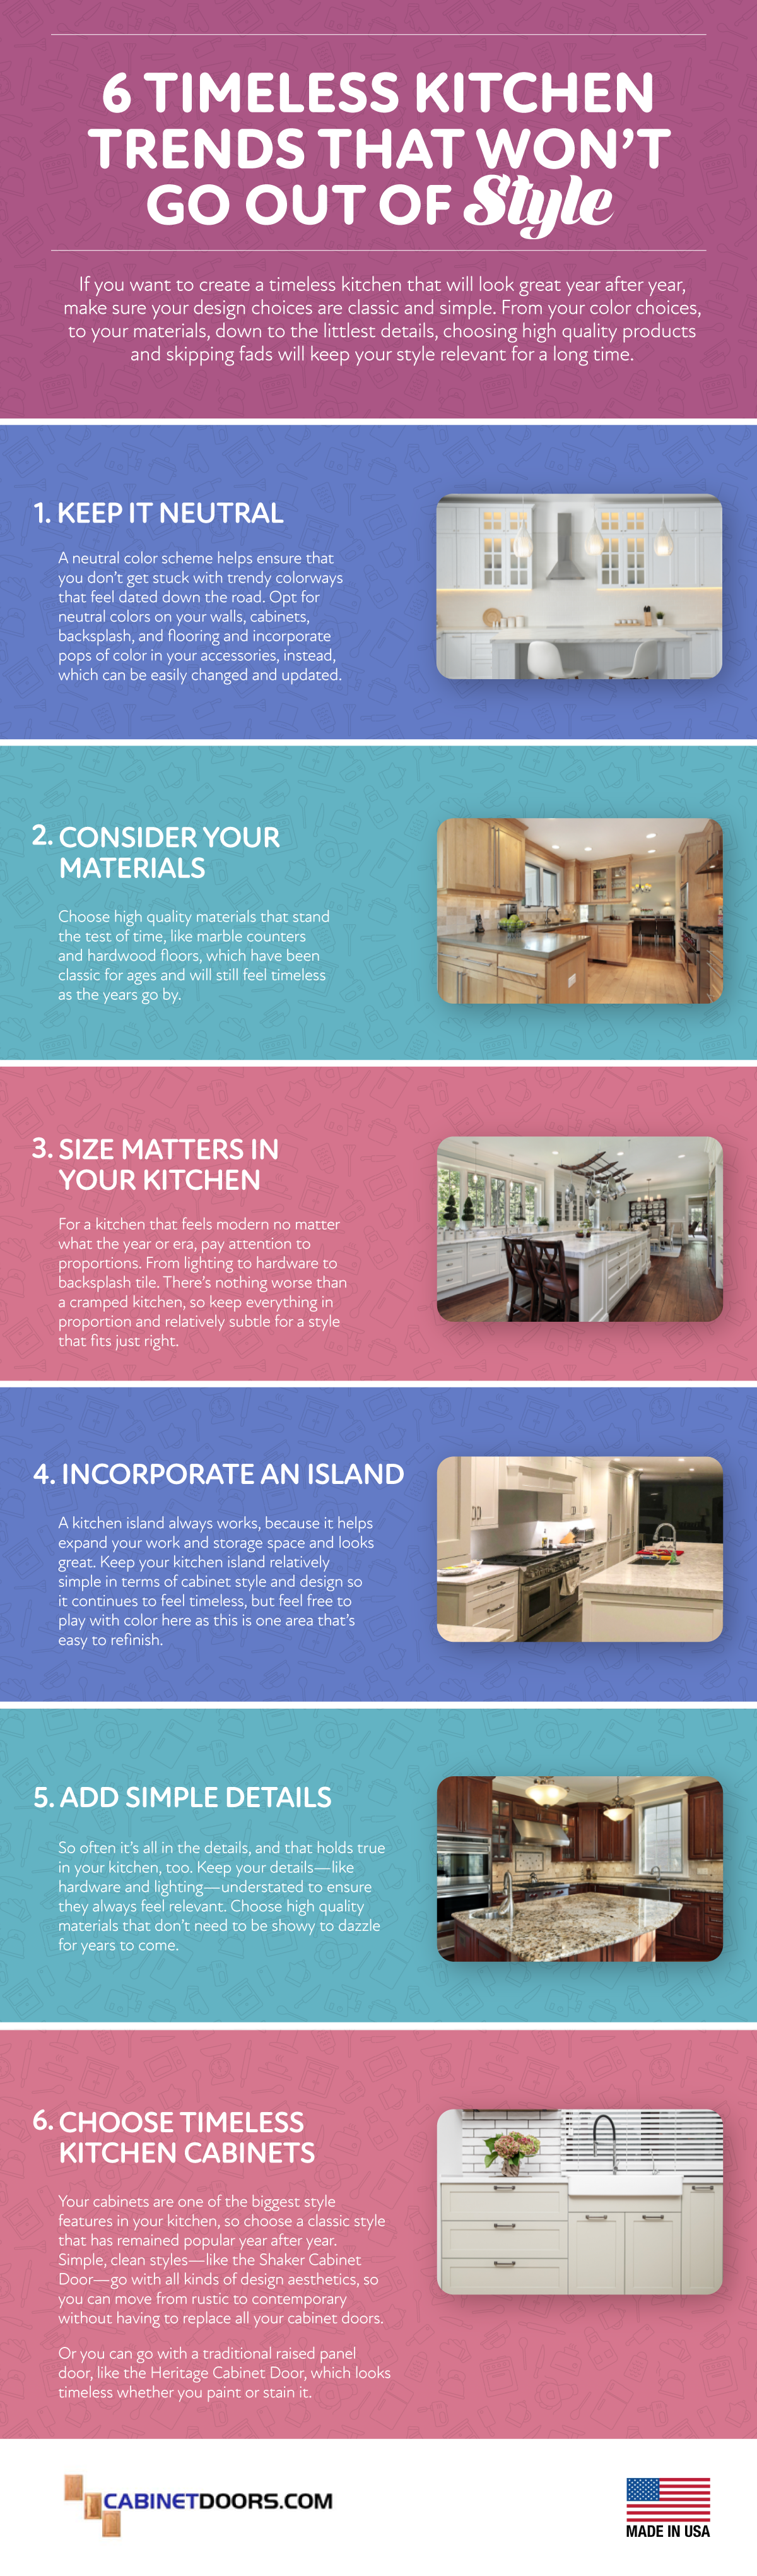 Timless Kitchen Trends Infographic